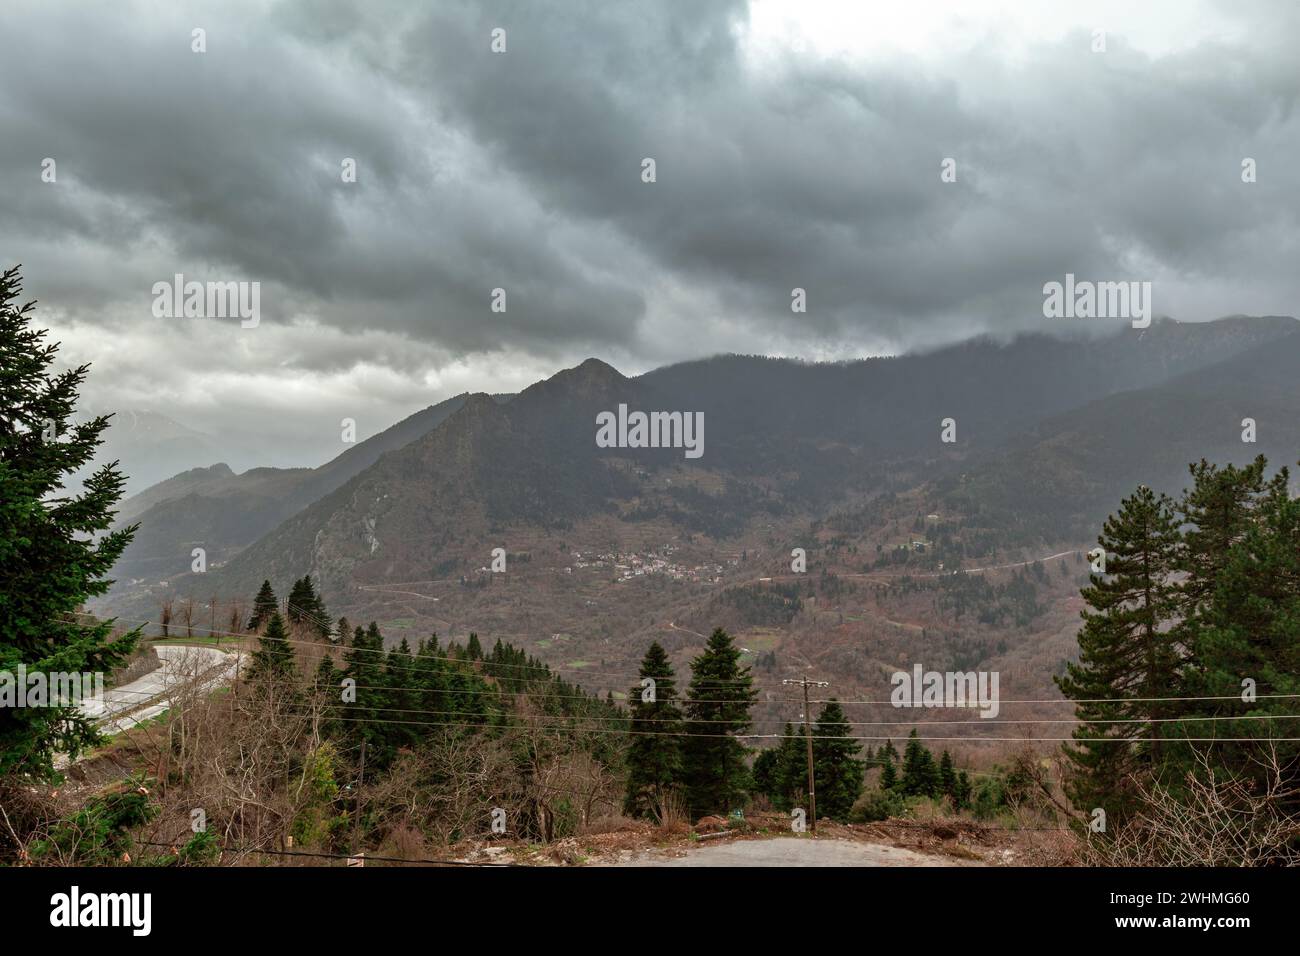 Dark clouds over Pindus mountains and firs trees as seen from the traditional village of Elati, near Trikala town, in Thessaly region, Central Greece, Stock Photo